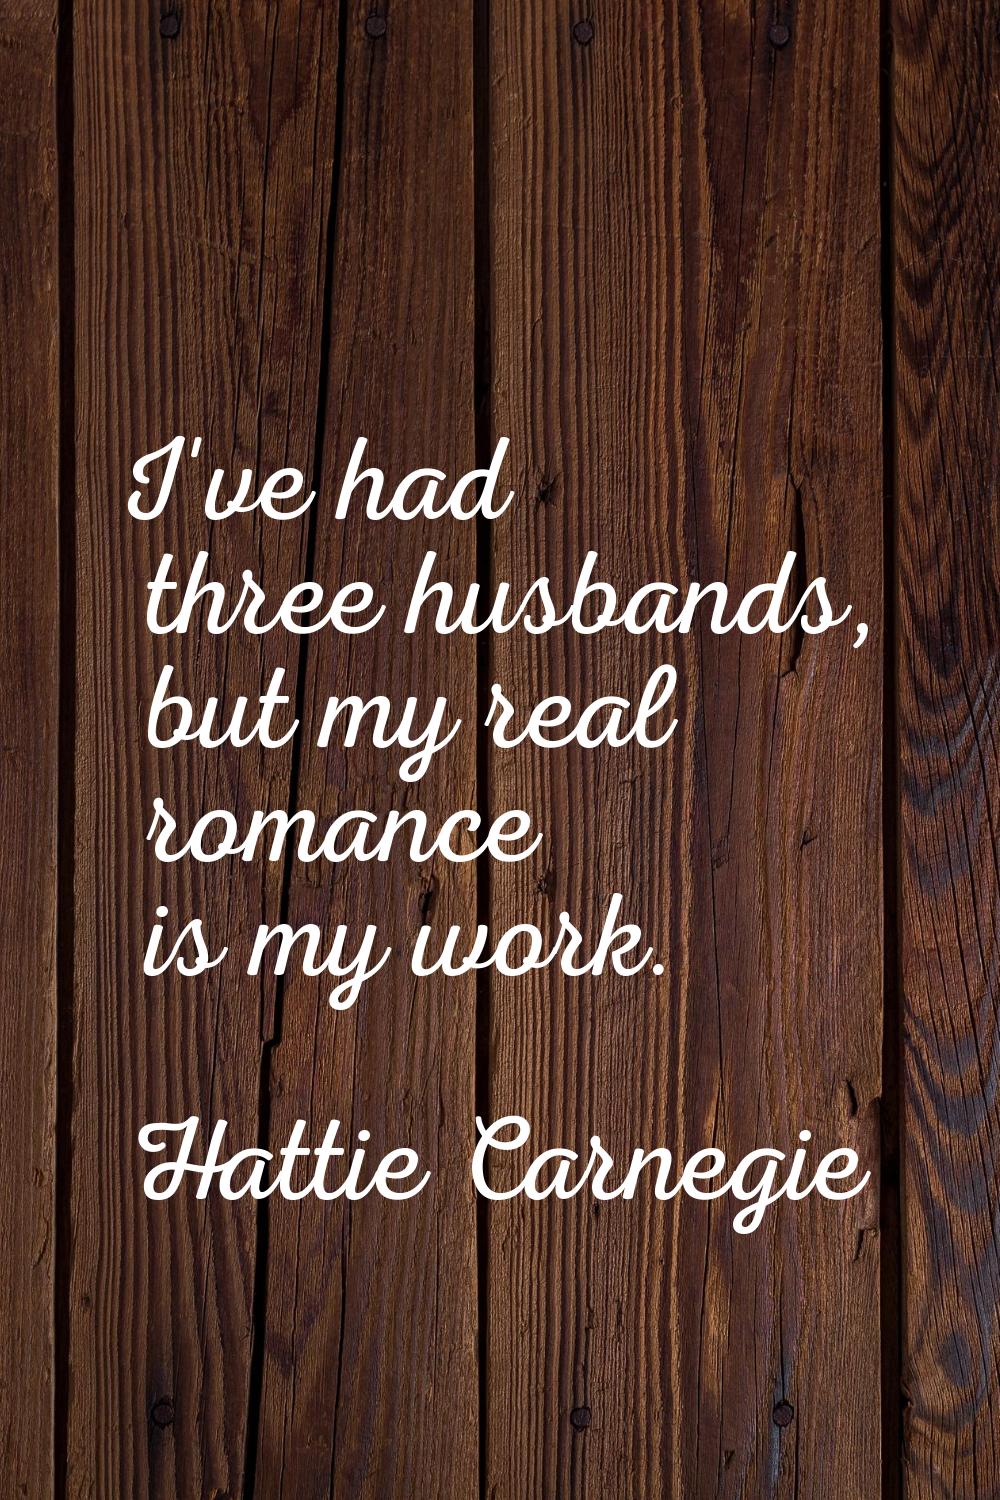 I've had three husbands, but my real romance is my work.